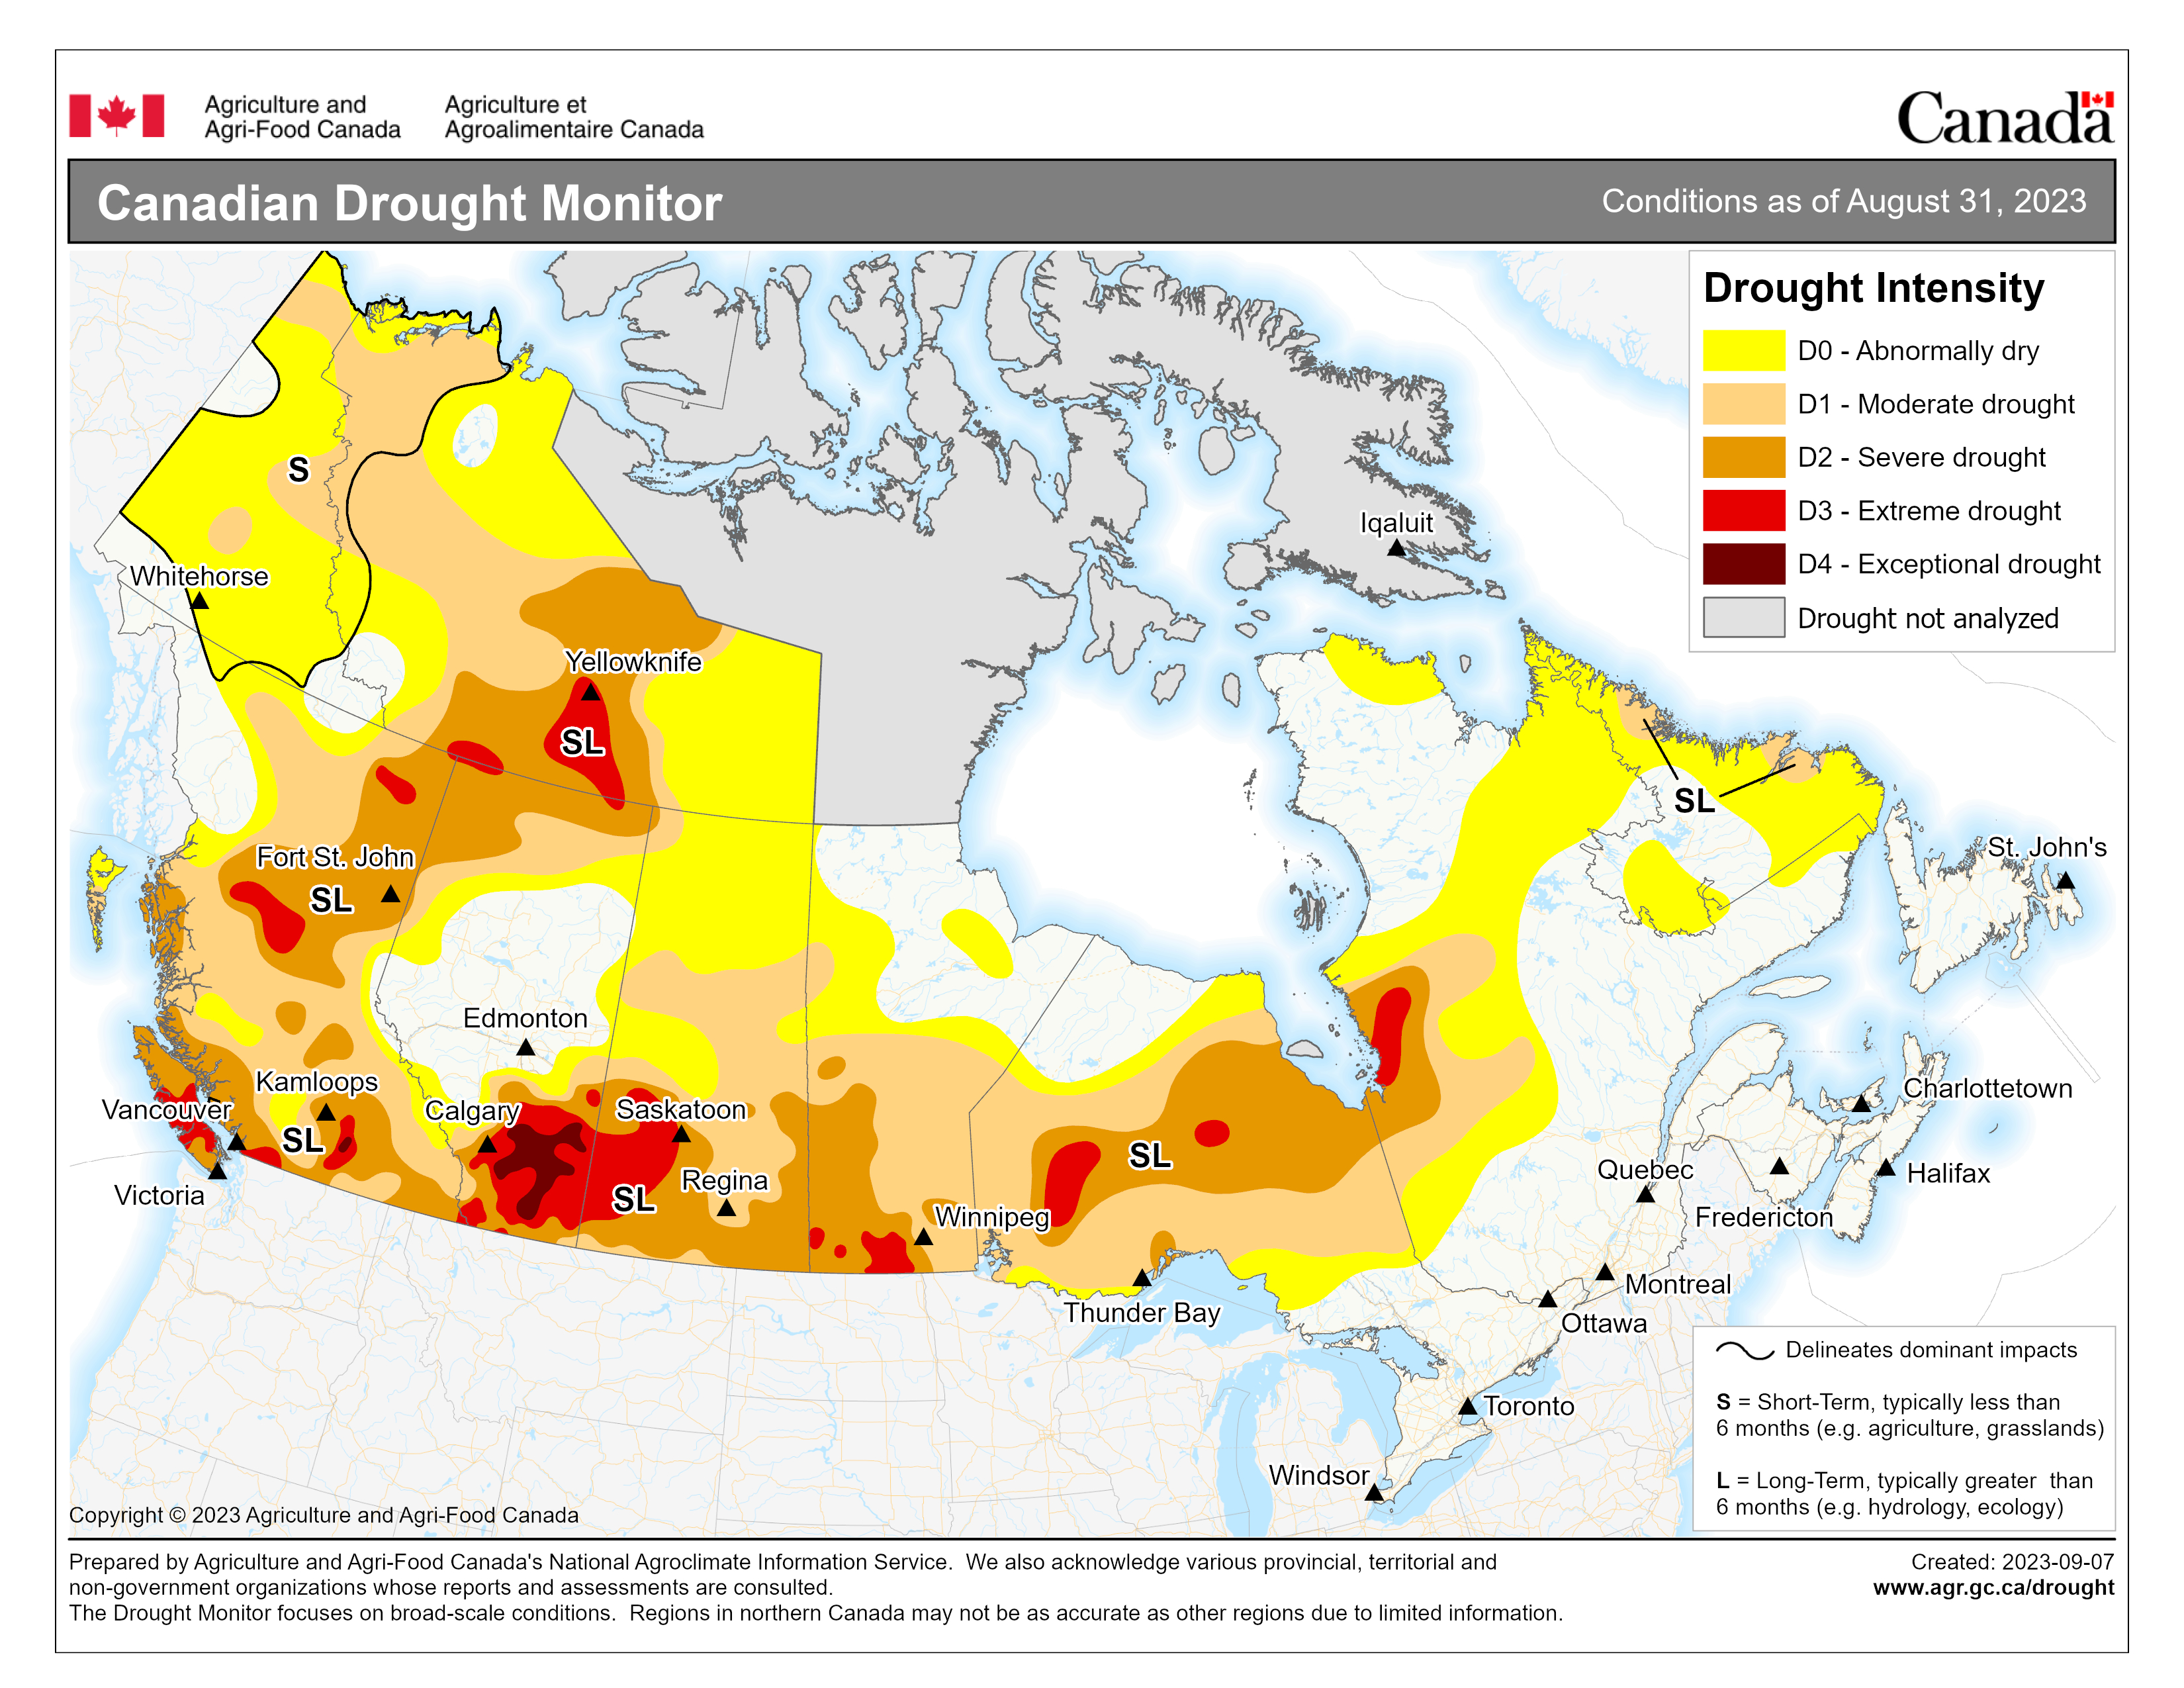 Map showing the Canadian Drought Monitor for conditions as of August 31, 2023